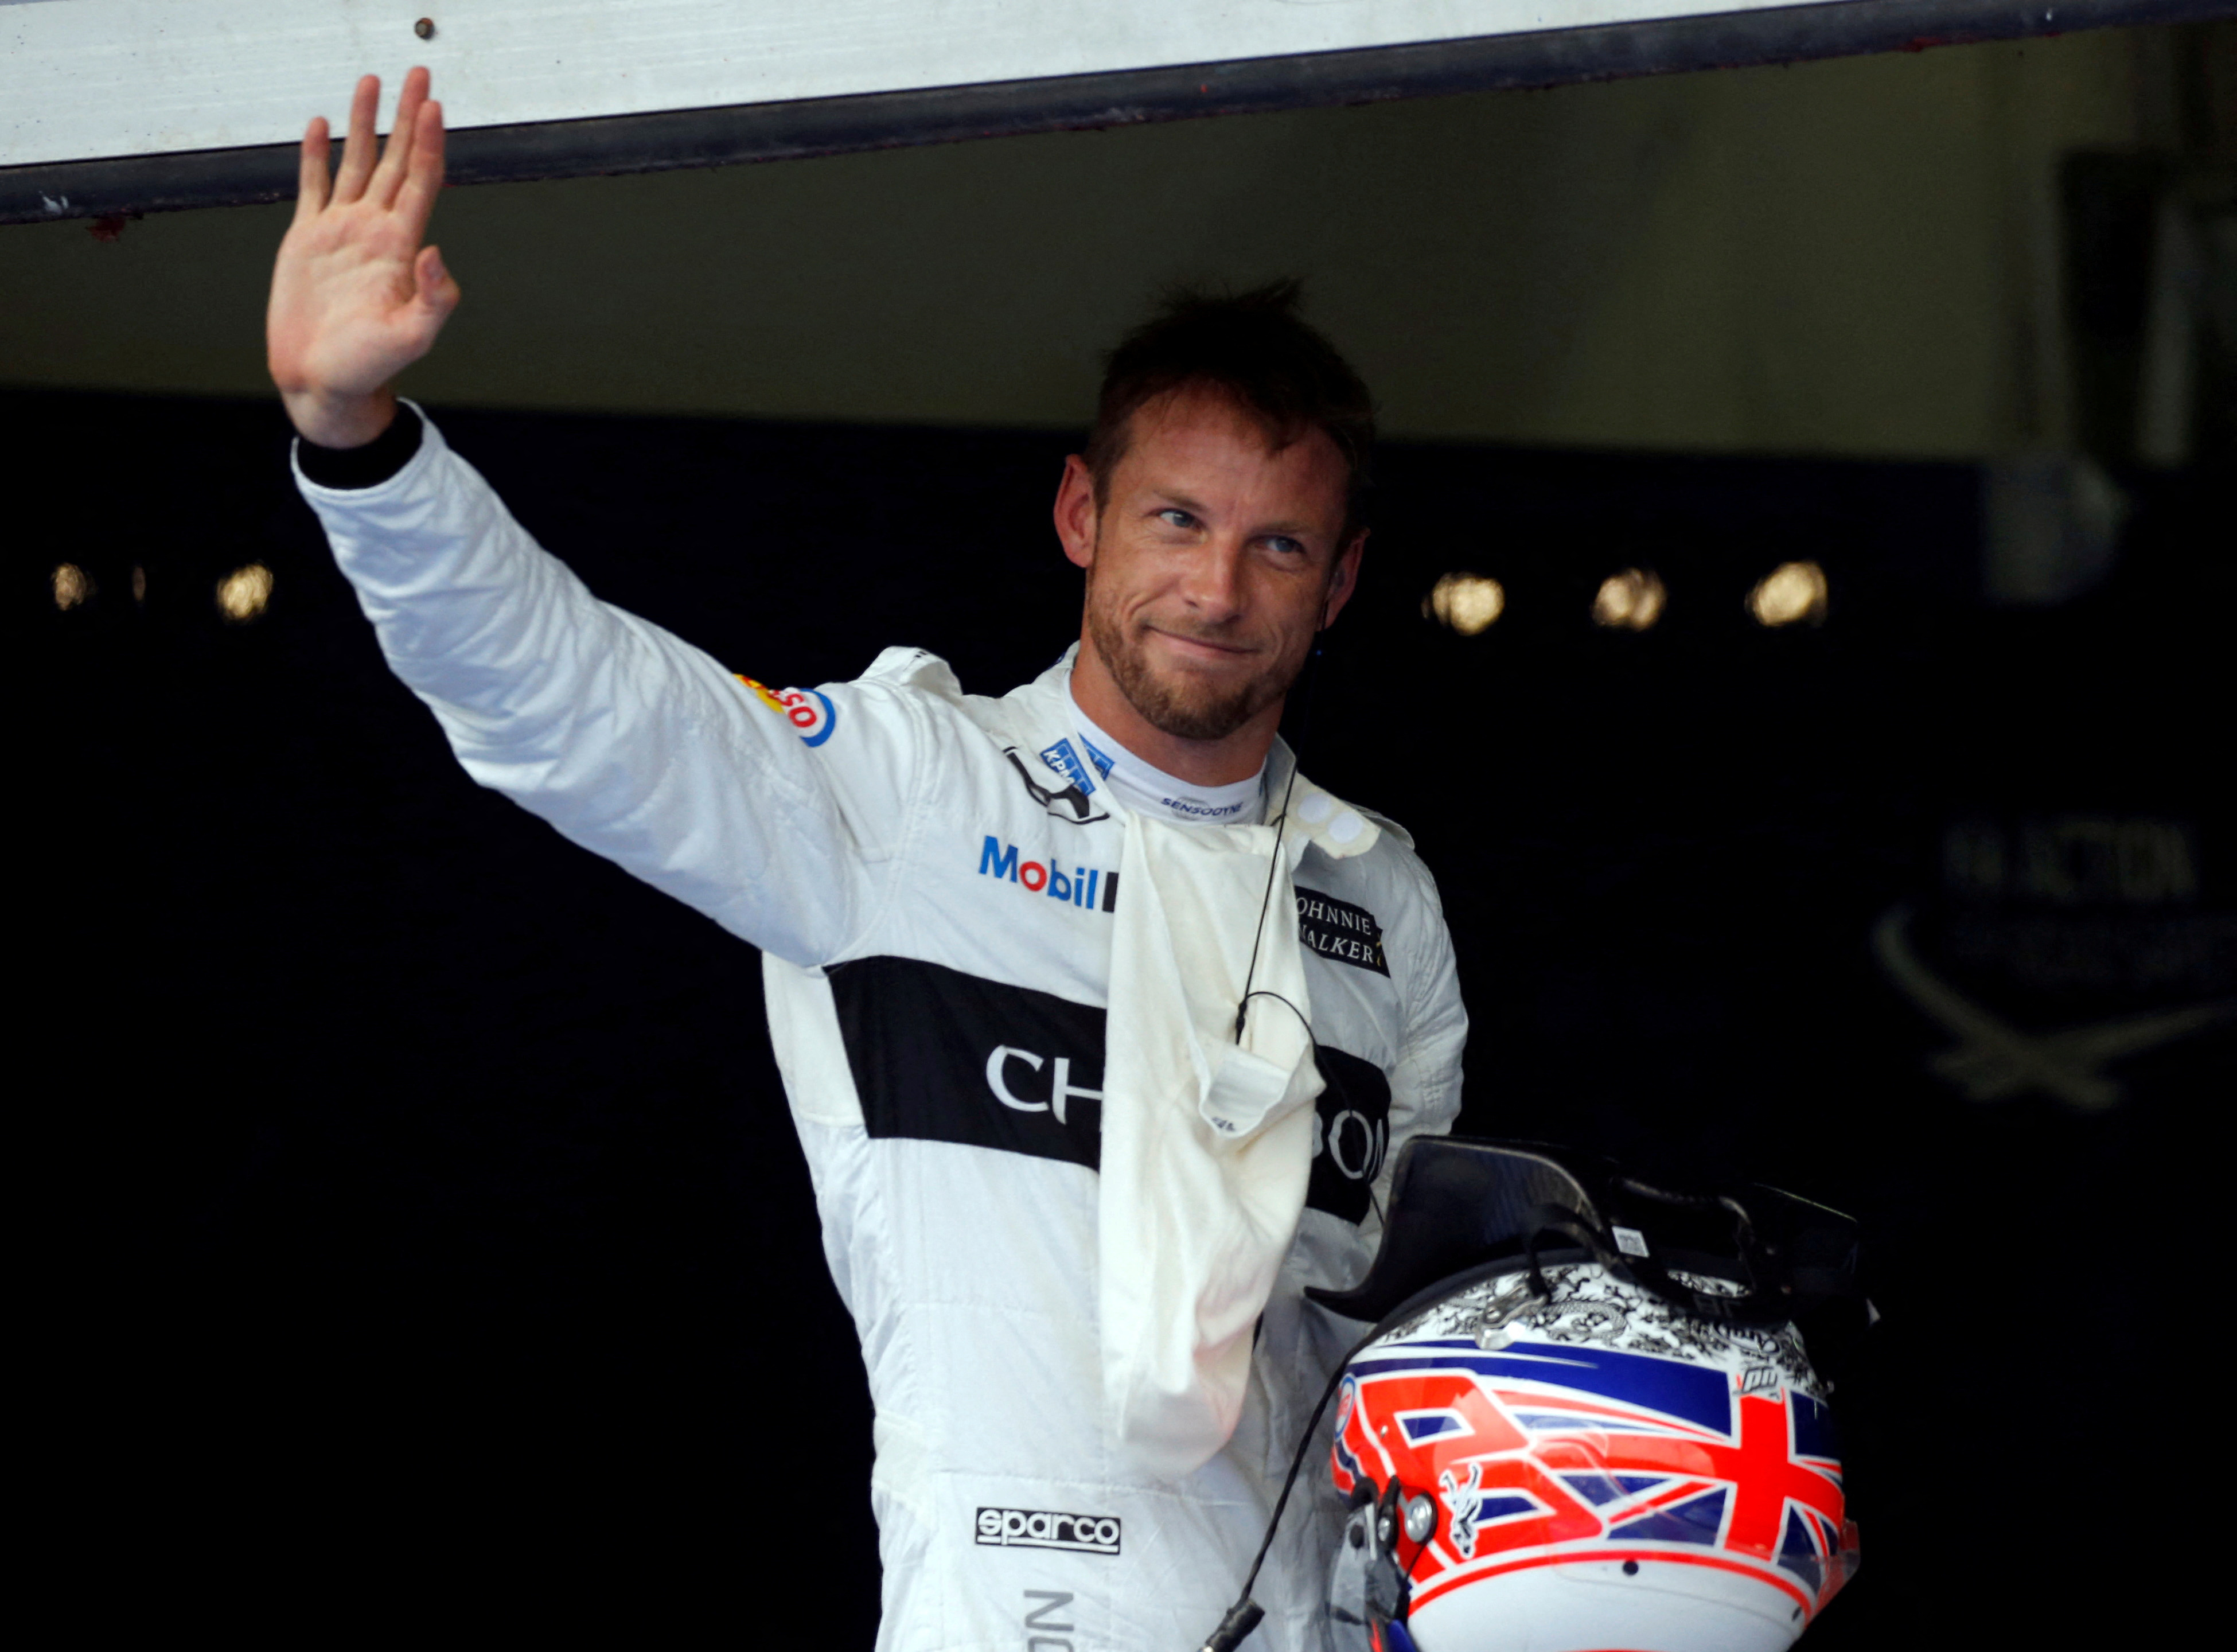 McLaren's Jenson Button of Britain waves after a qualifying session at the Formula One Malaysia Grand Prix in Sepang, Malaysia